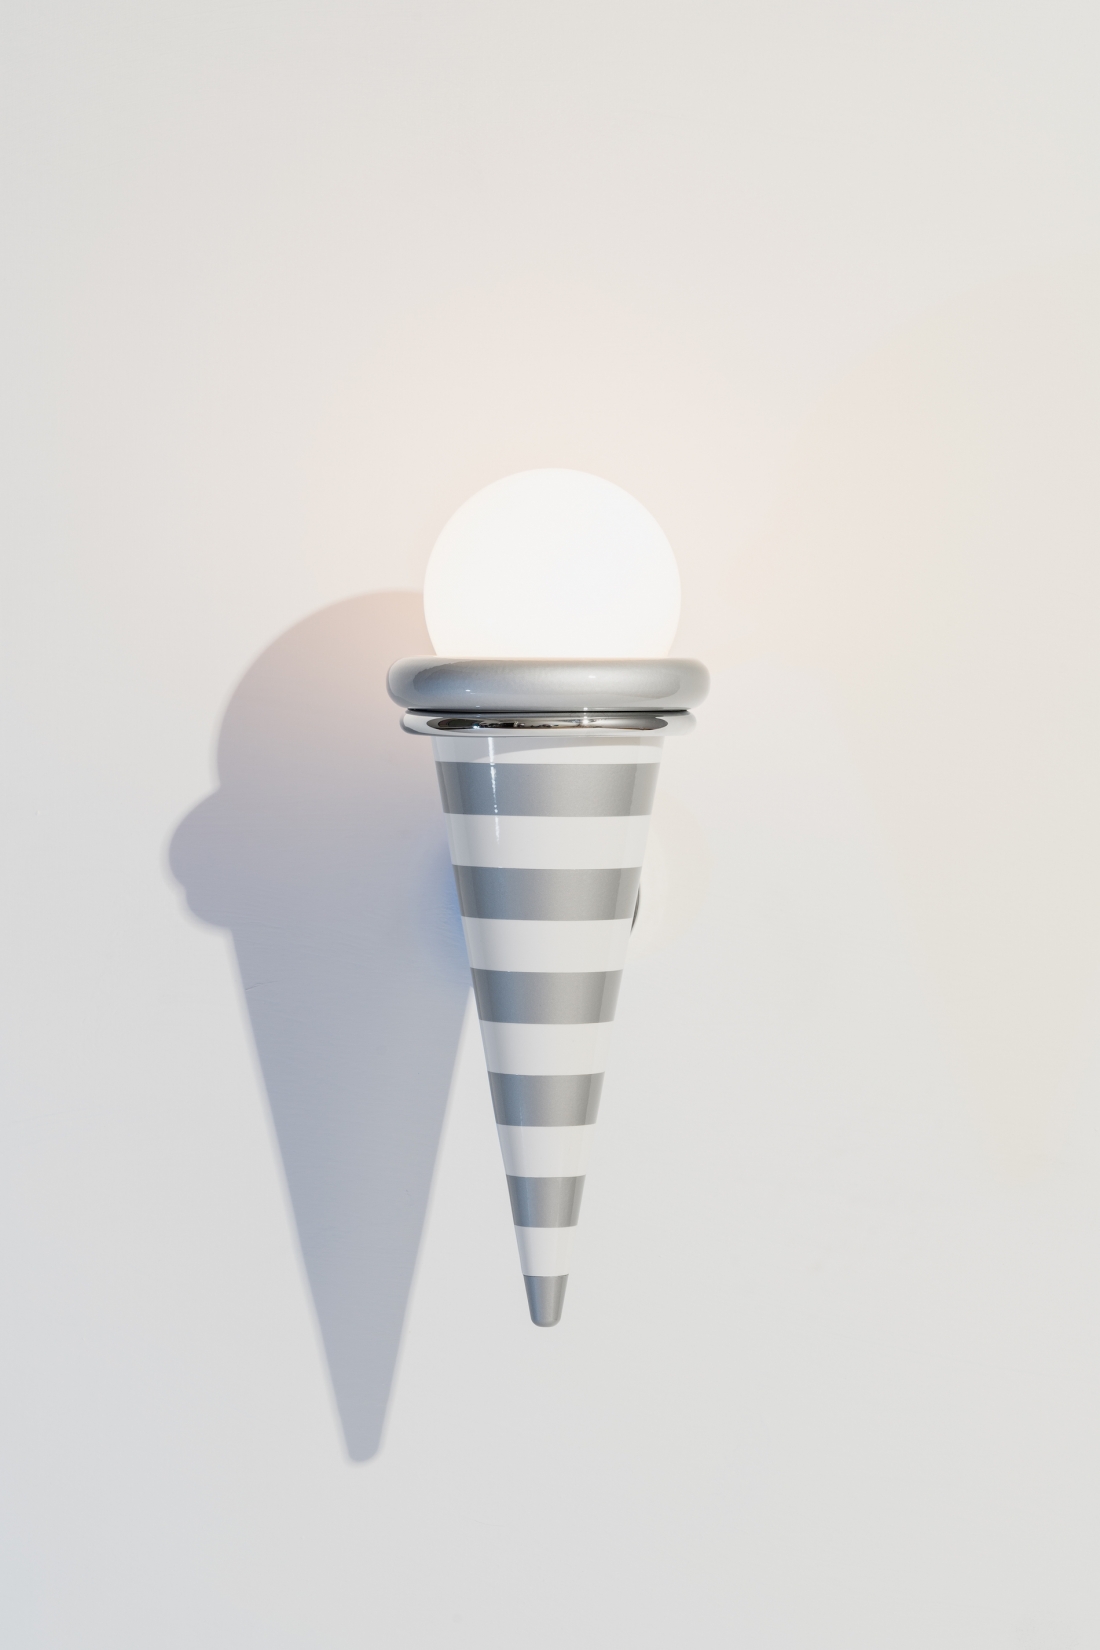 Gelato, Masanori Umeda, 2020 (based on a 1982 design), “Night Tales” Collection, Post Design. Lamp with aluminium structure, available in table, wall-mounted and ceiling versions. GLOBO 14W-E27 led bulb. Dimensions: table diameter 21, H 43 cm, appliqué diameter 15, H 40 cm; ceiling diameter 15, H 40 cm. Photograph © Delfino Sisto Legnani. Courtesy of Memphis srl. 